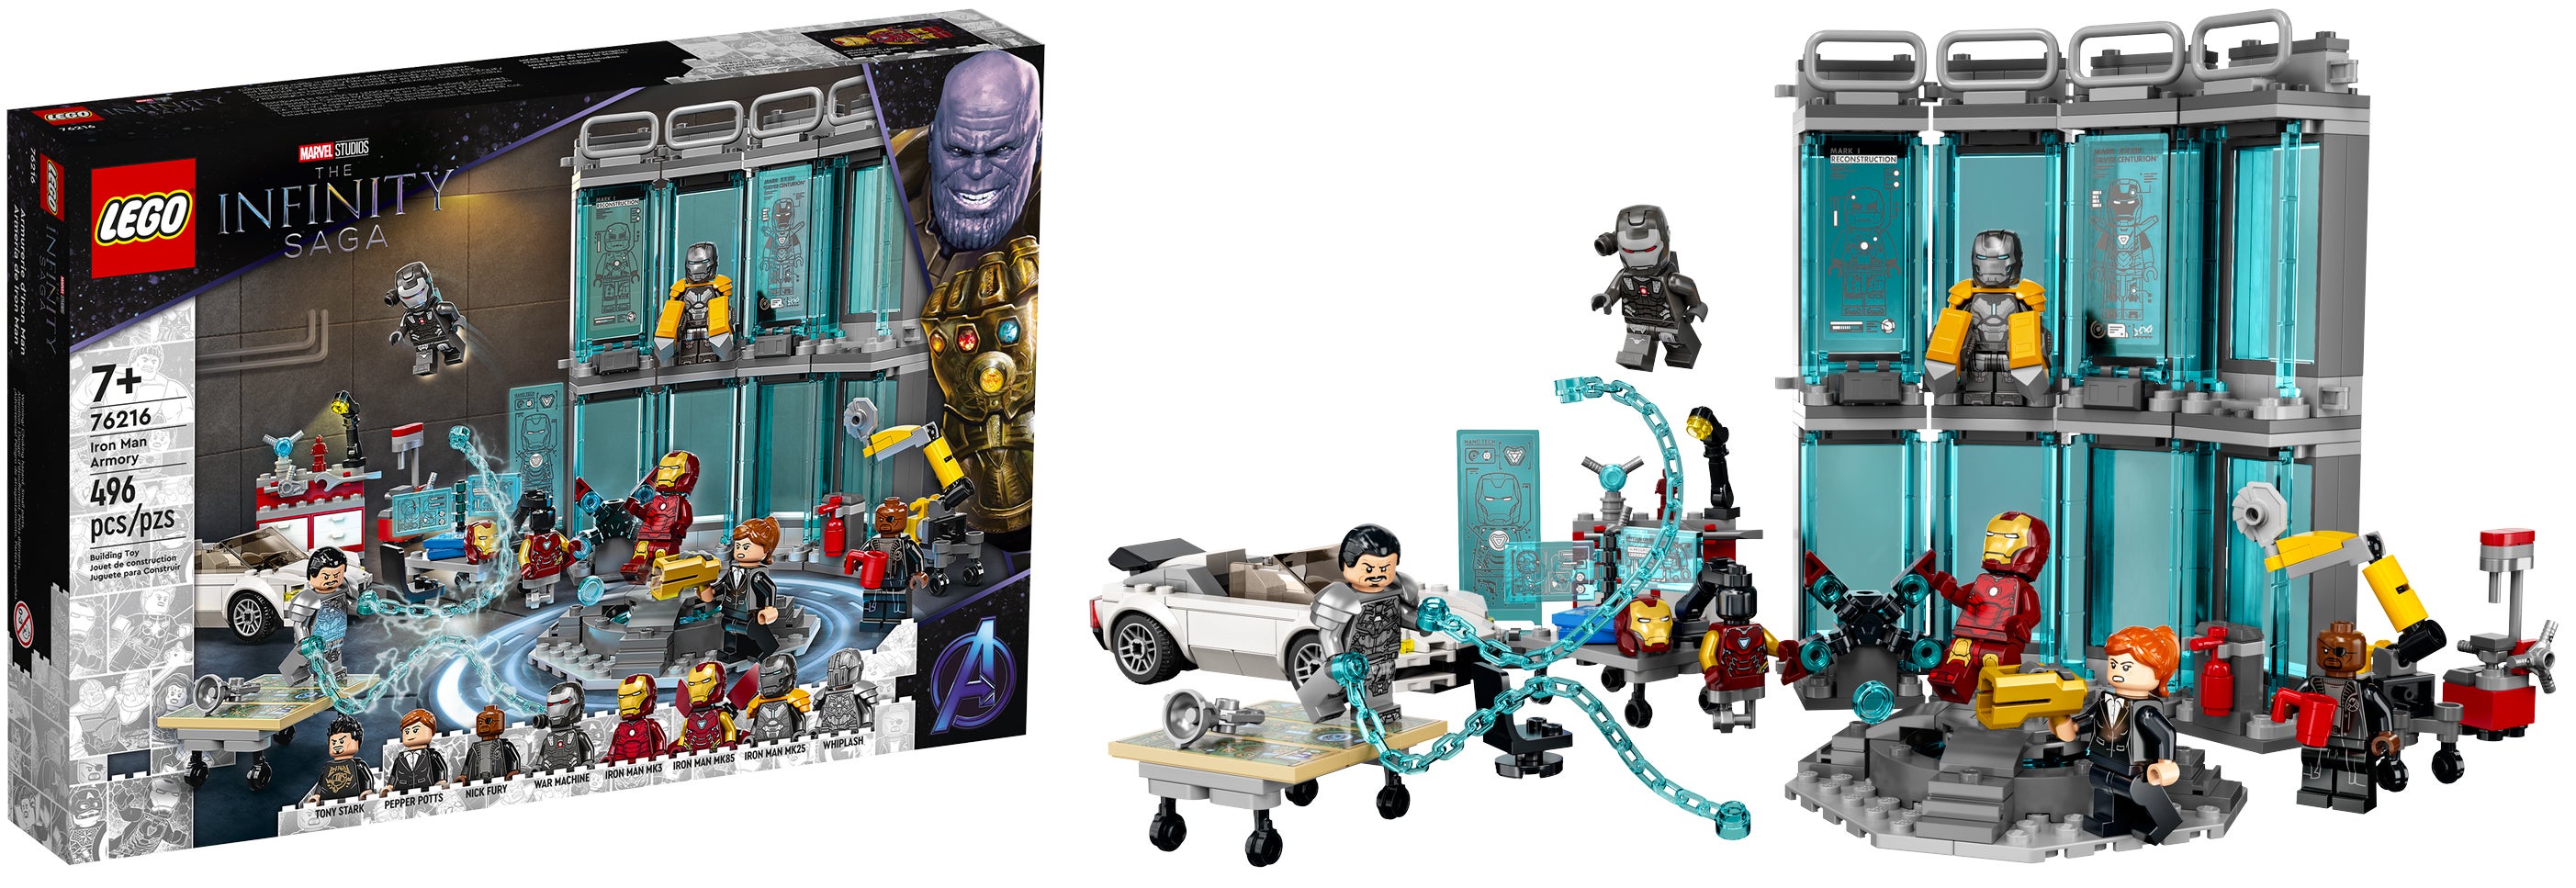 Star Wars, Marvel, and Hygienic Dinos Lead This Week's Toy News